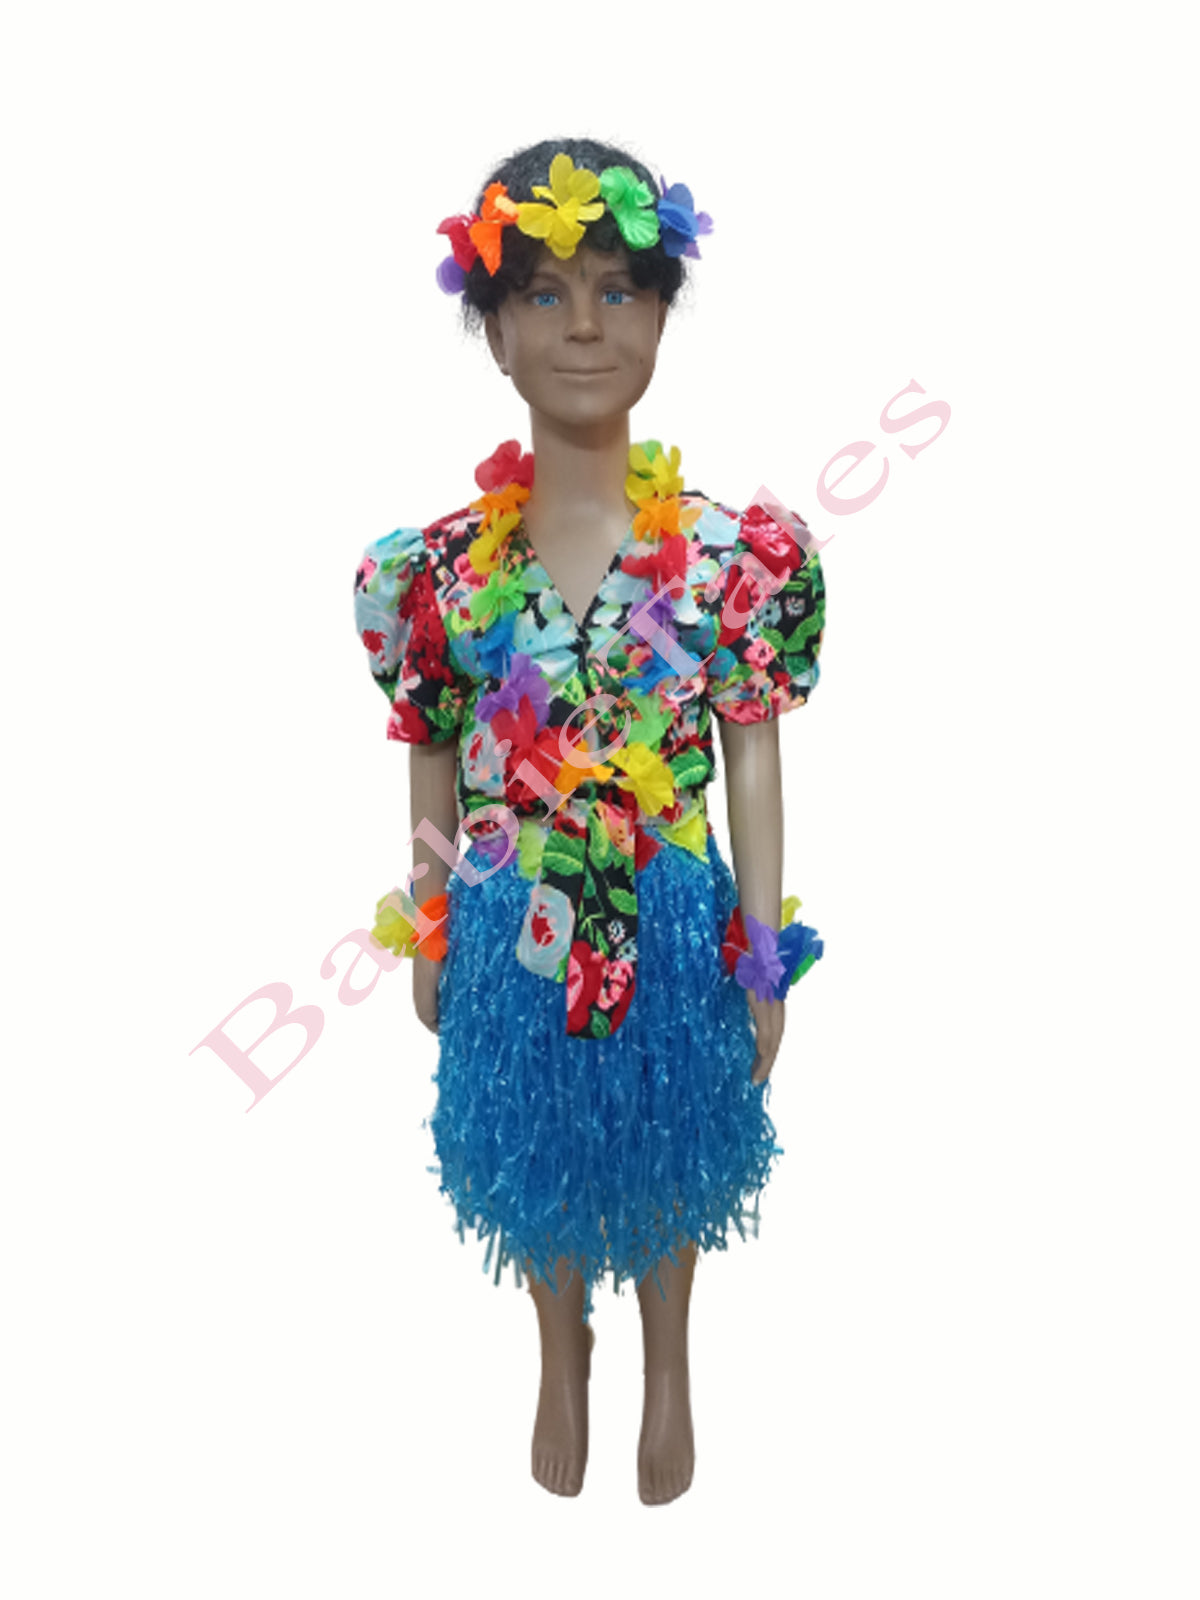 Mother Nature, Mother Earth, Madre Tierra, DIY Costume | Costumi, Carnevale